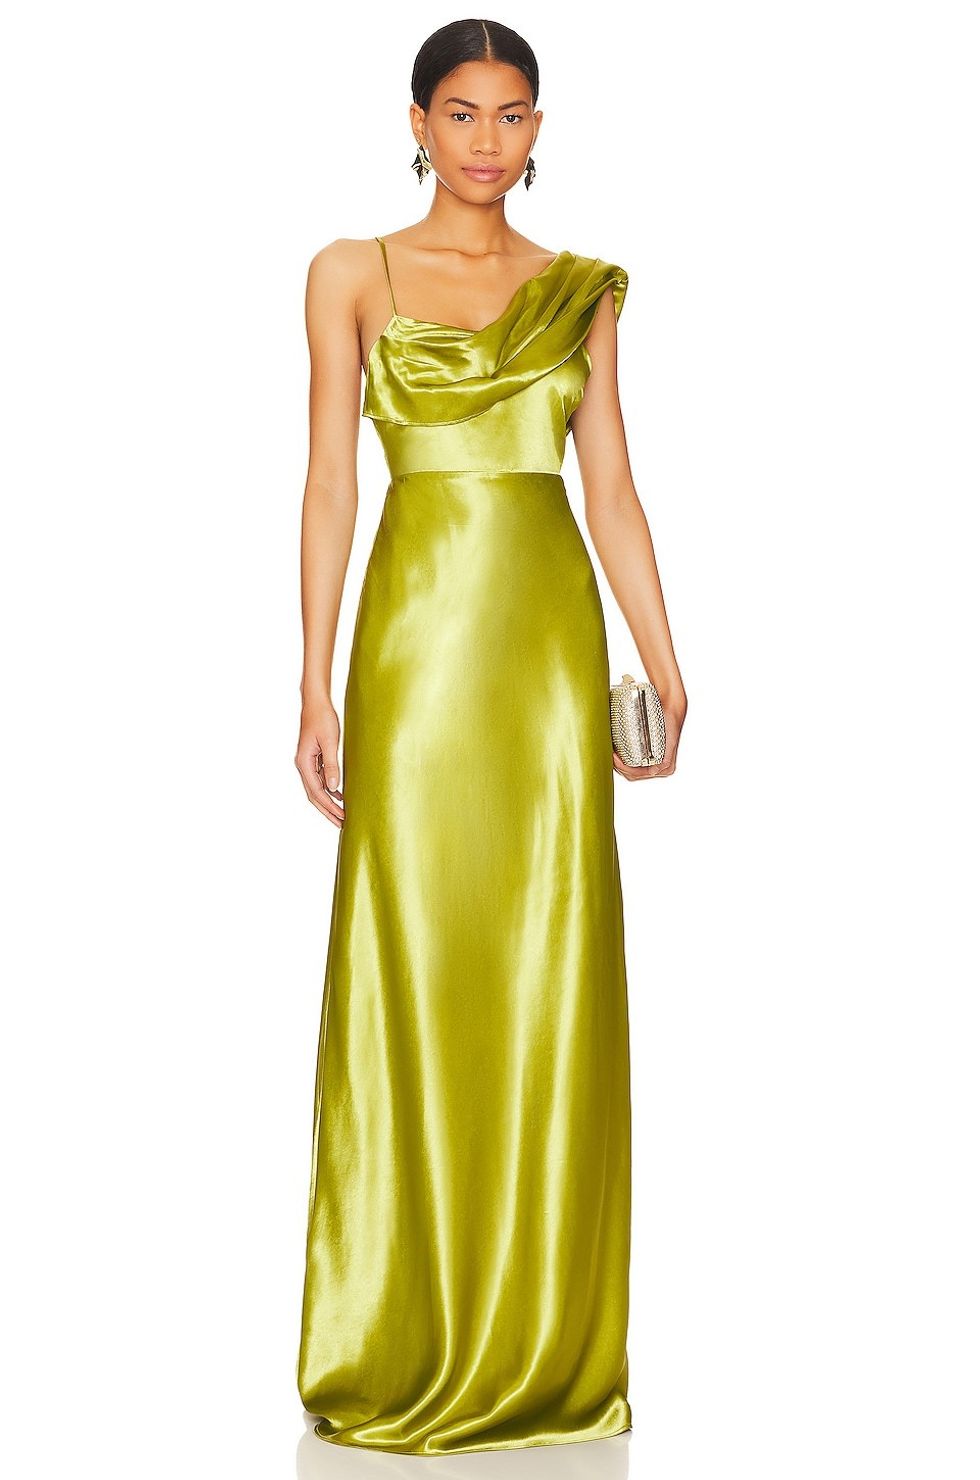 House of Harlow 1960 x REVOLVE Antonia Gown ($278)